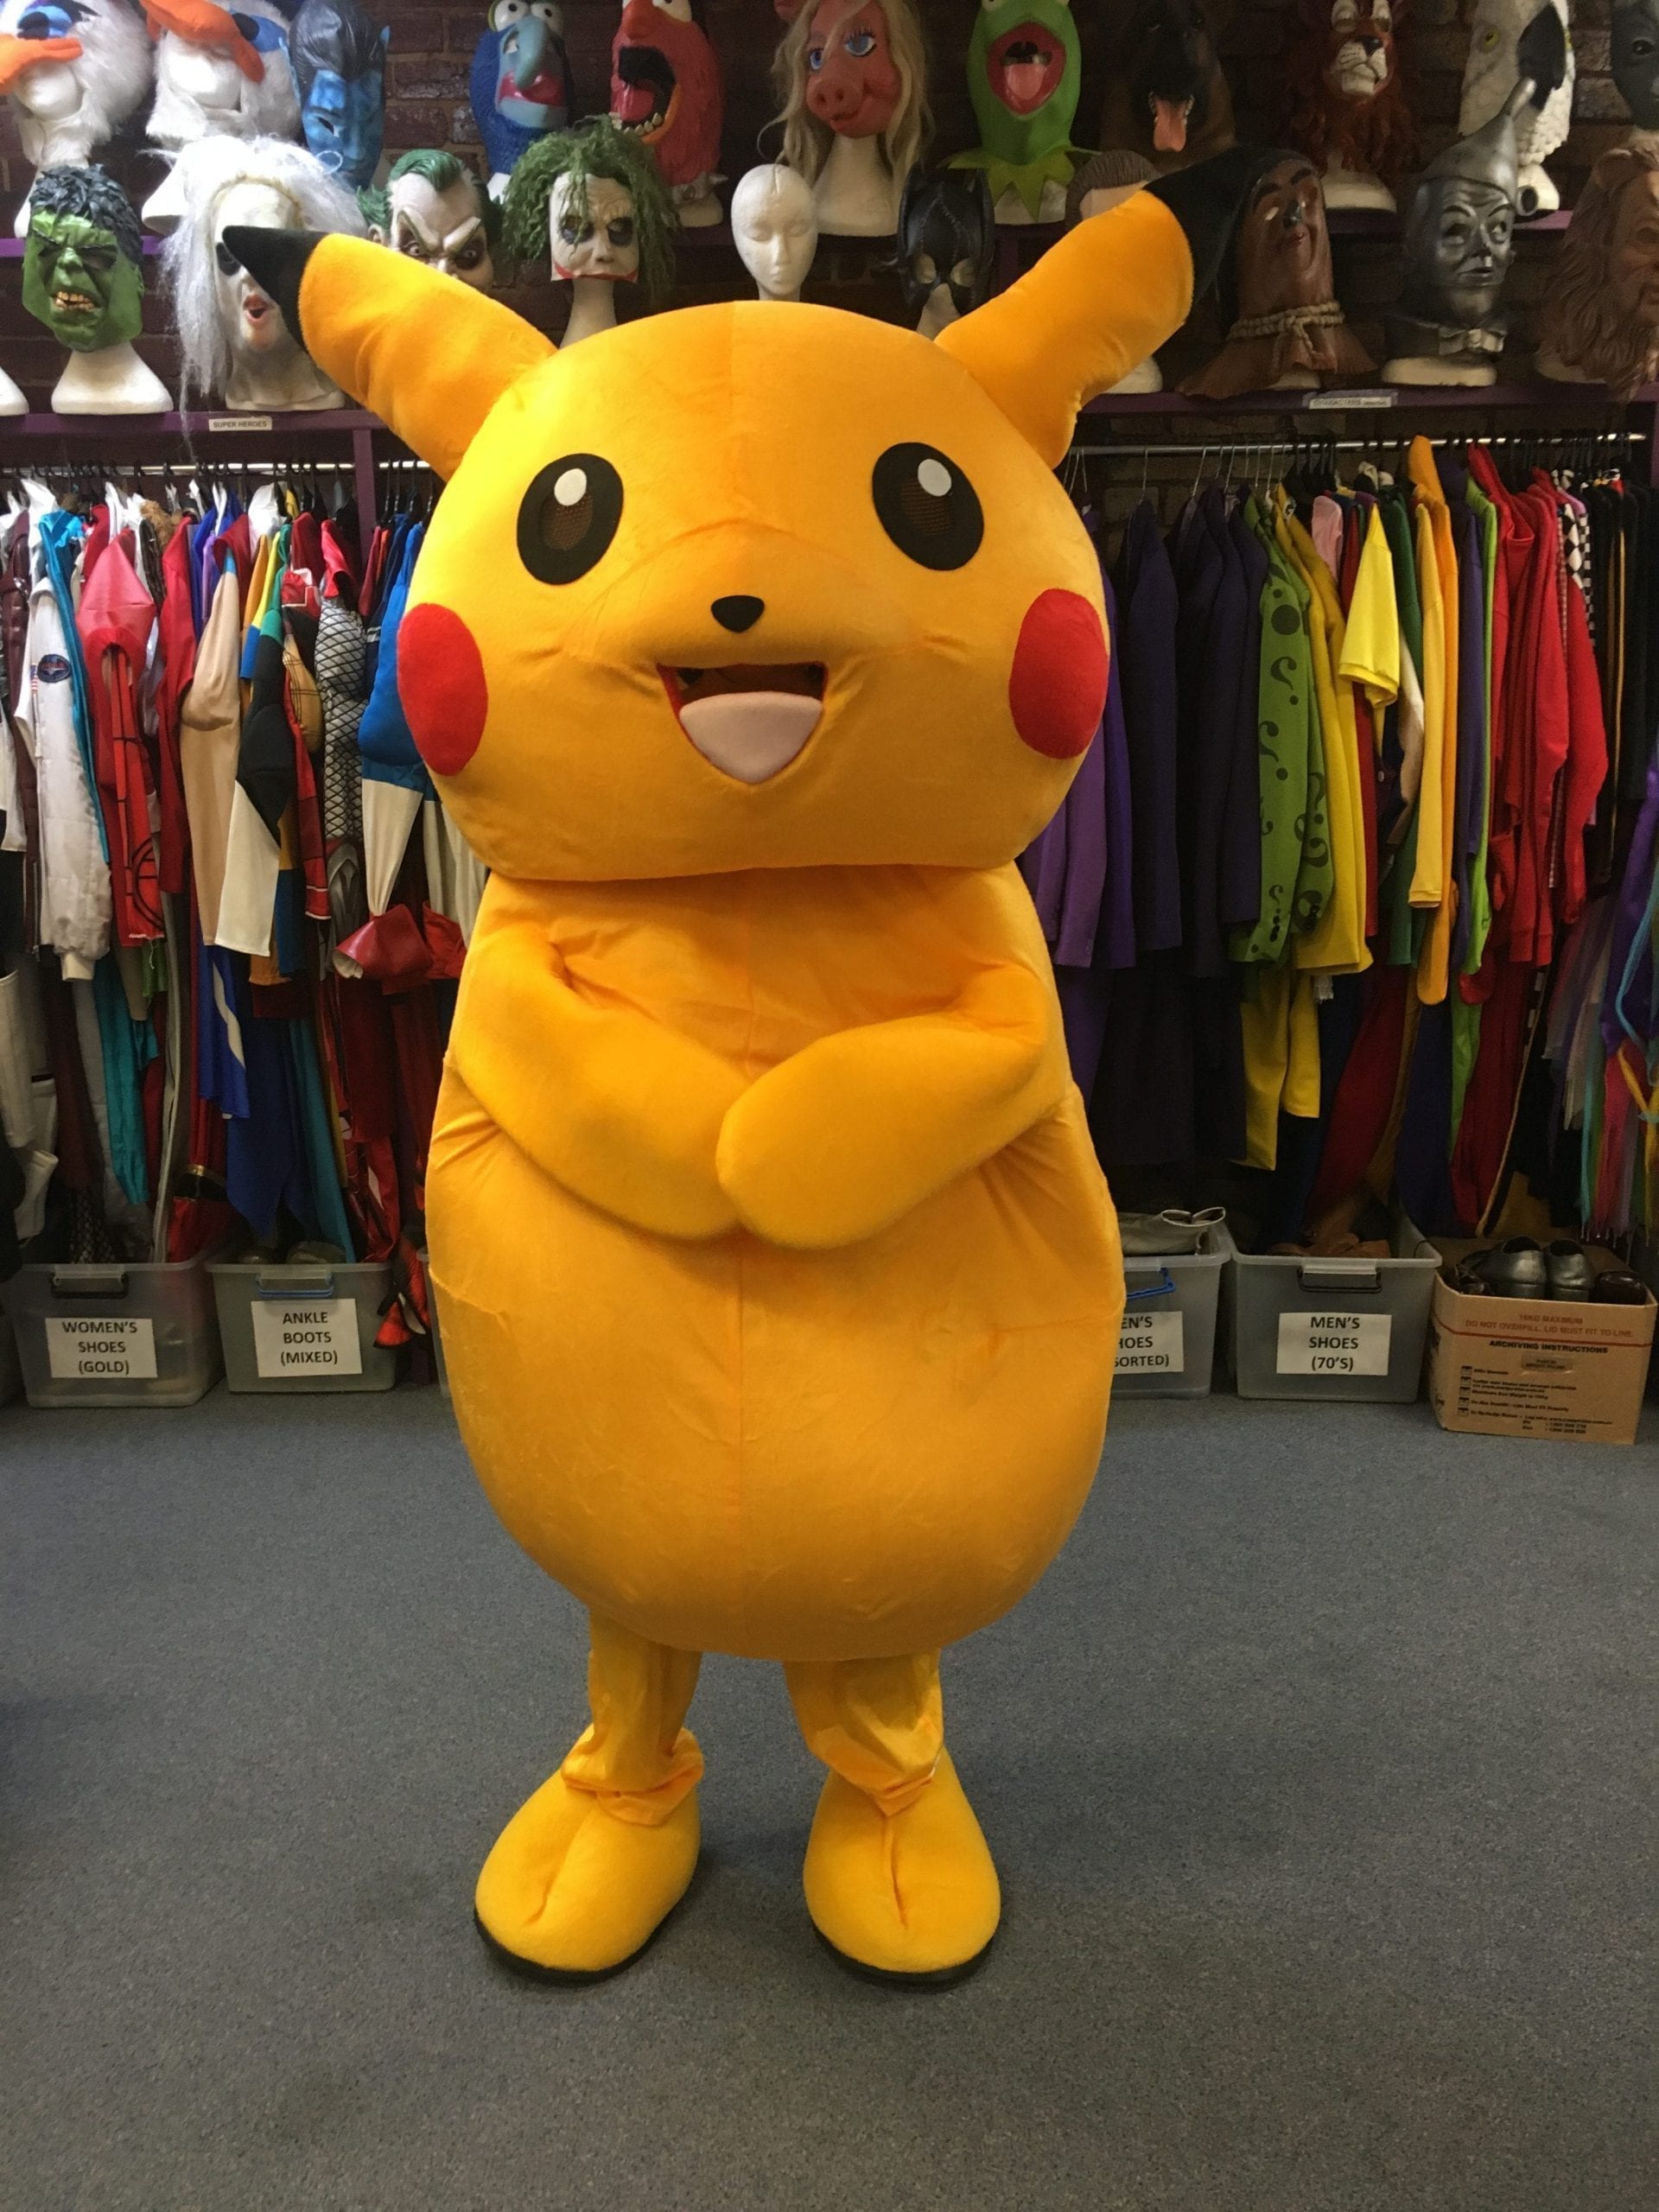 Featured image for “Pikachu (Mascot)”